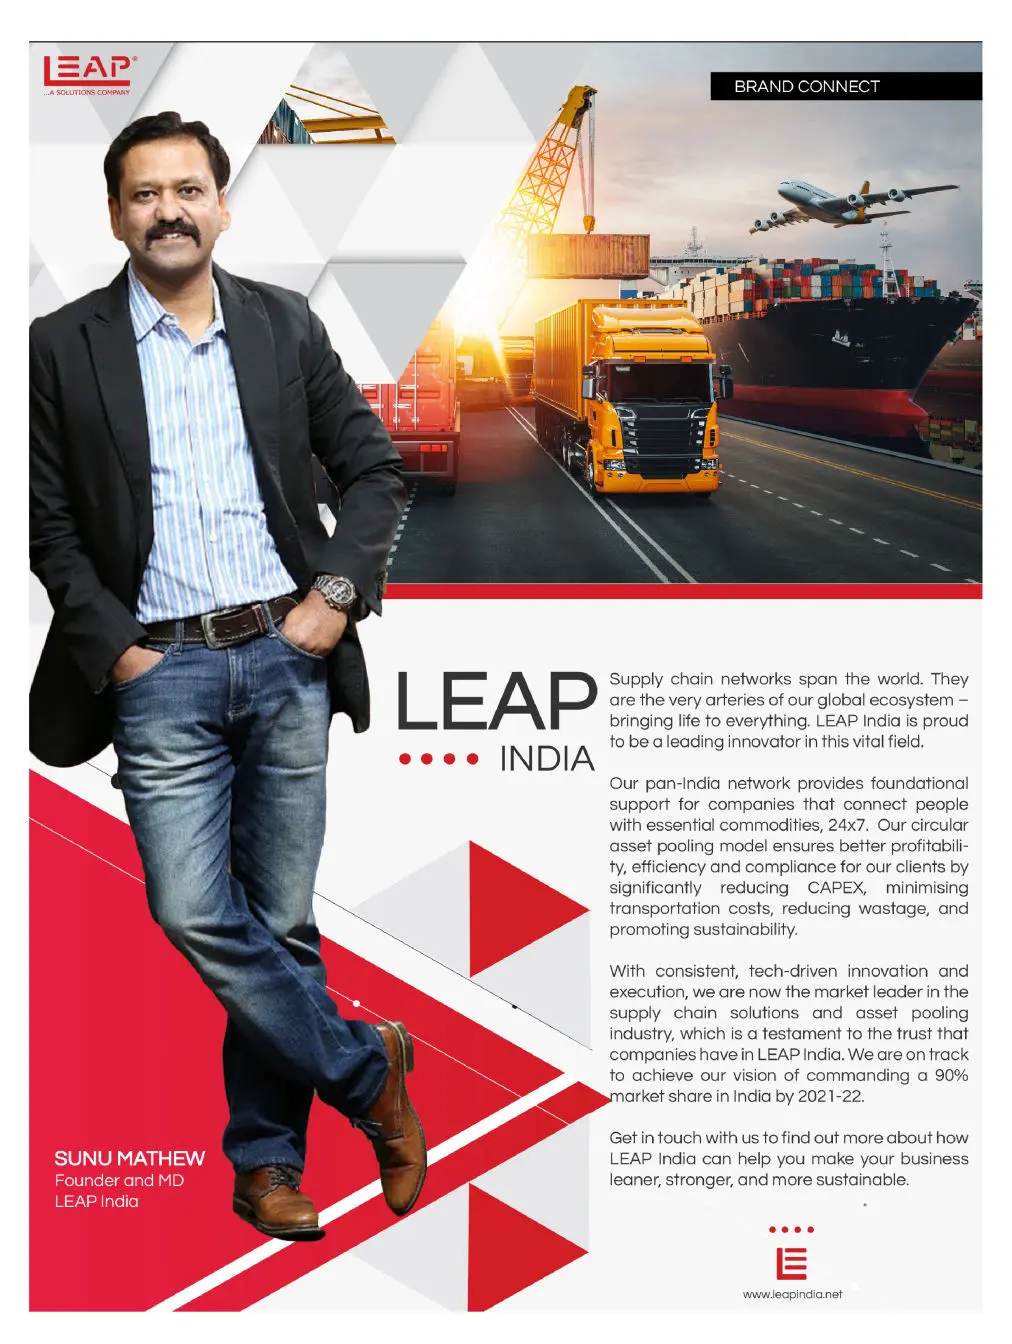 LEAP India Forbes